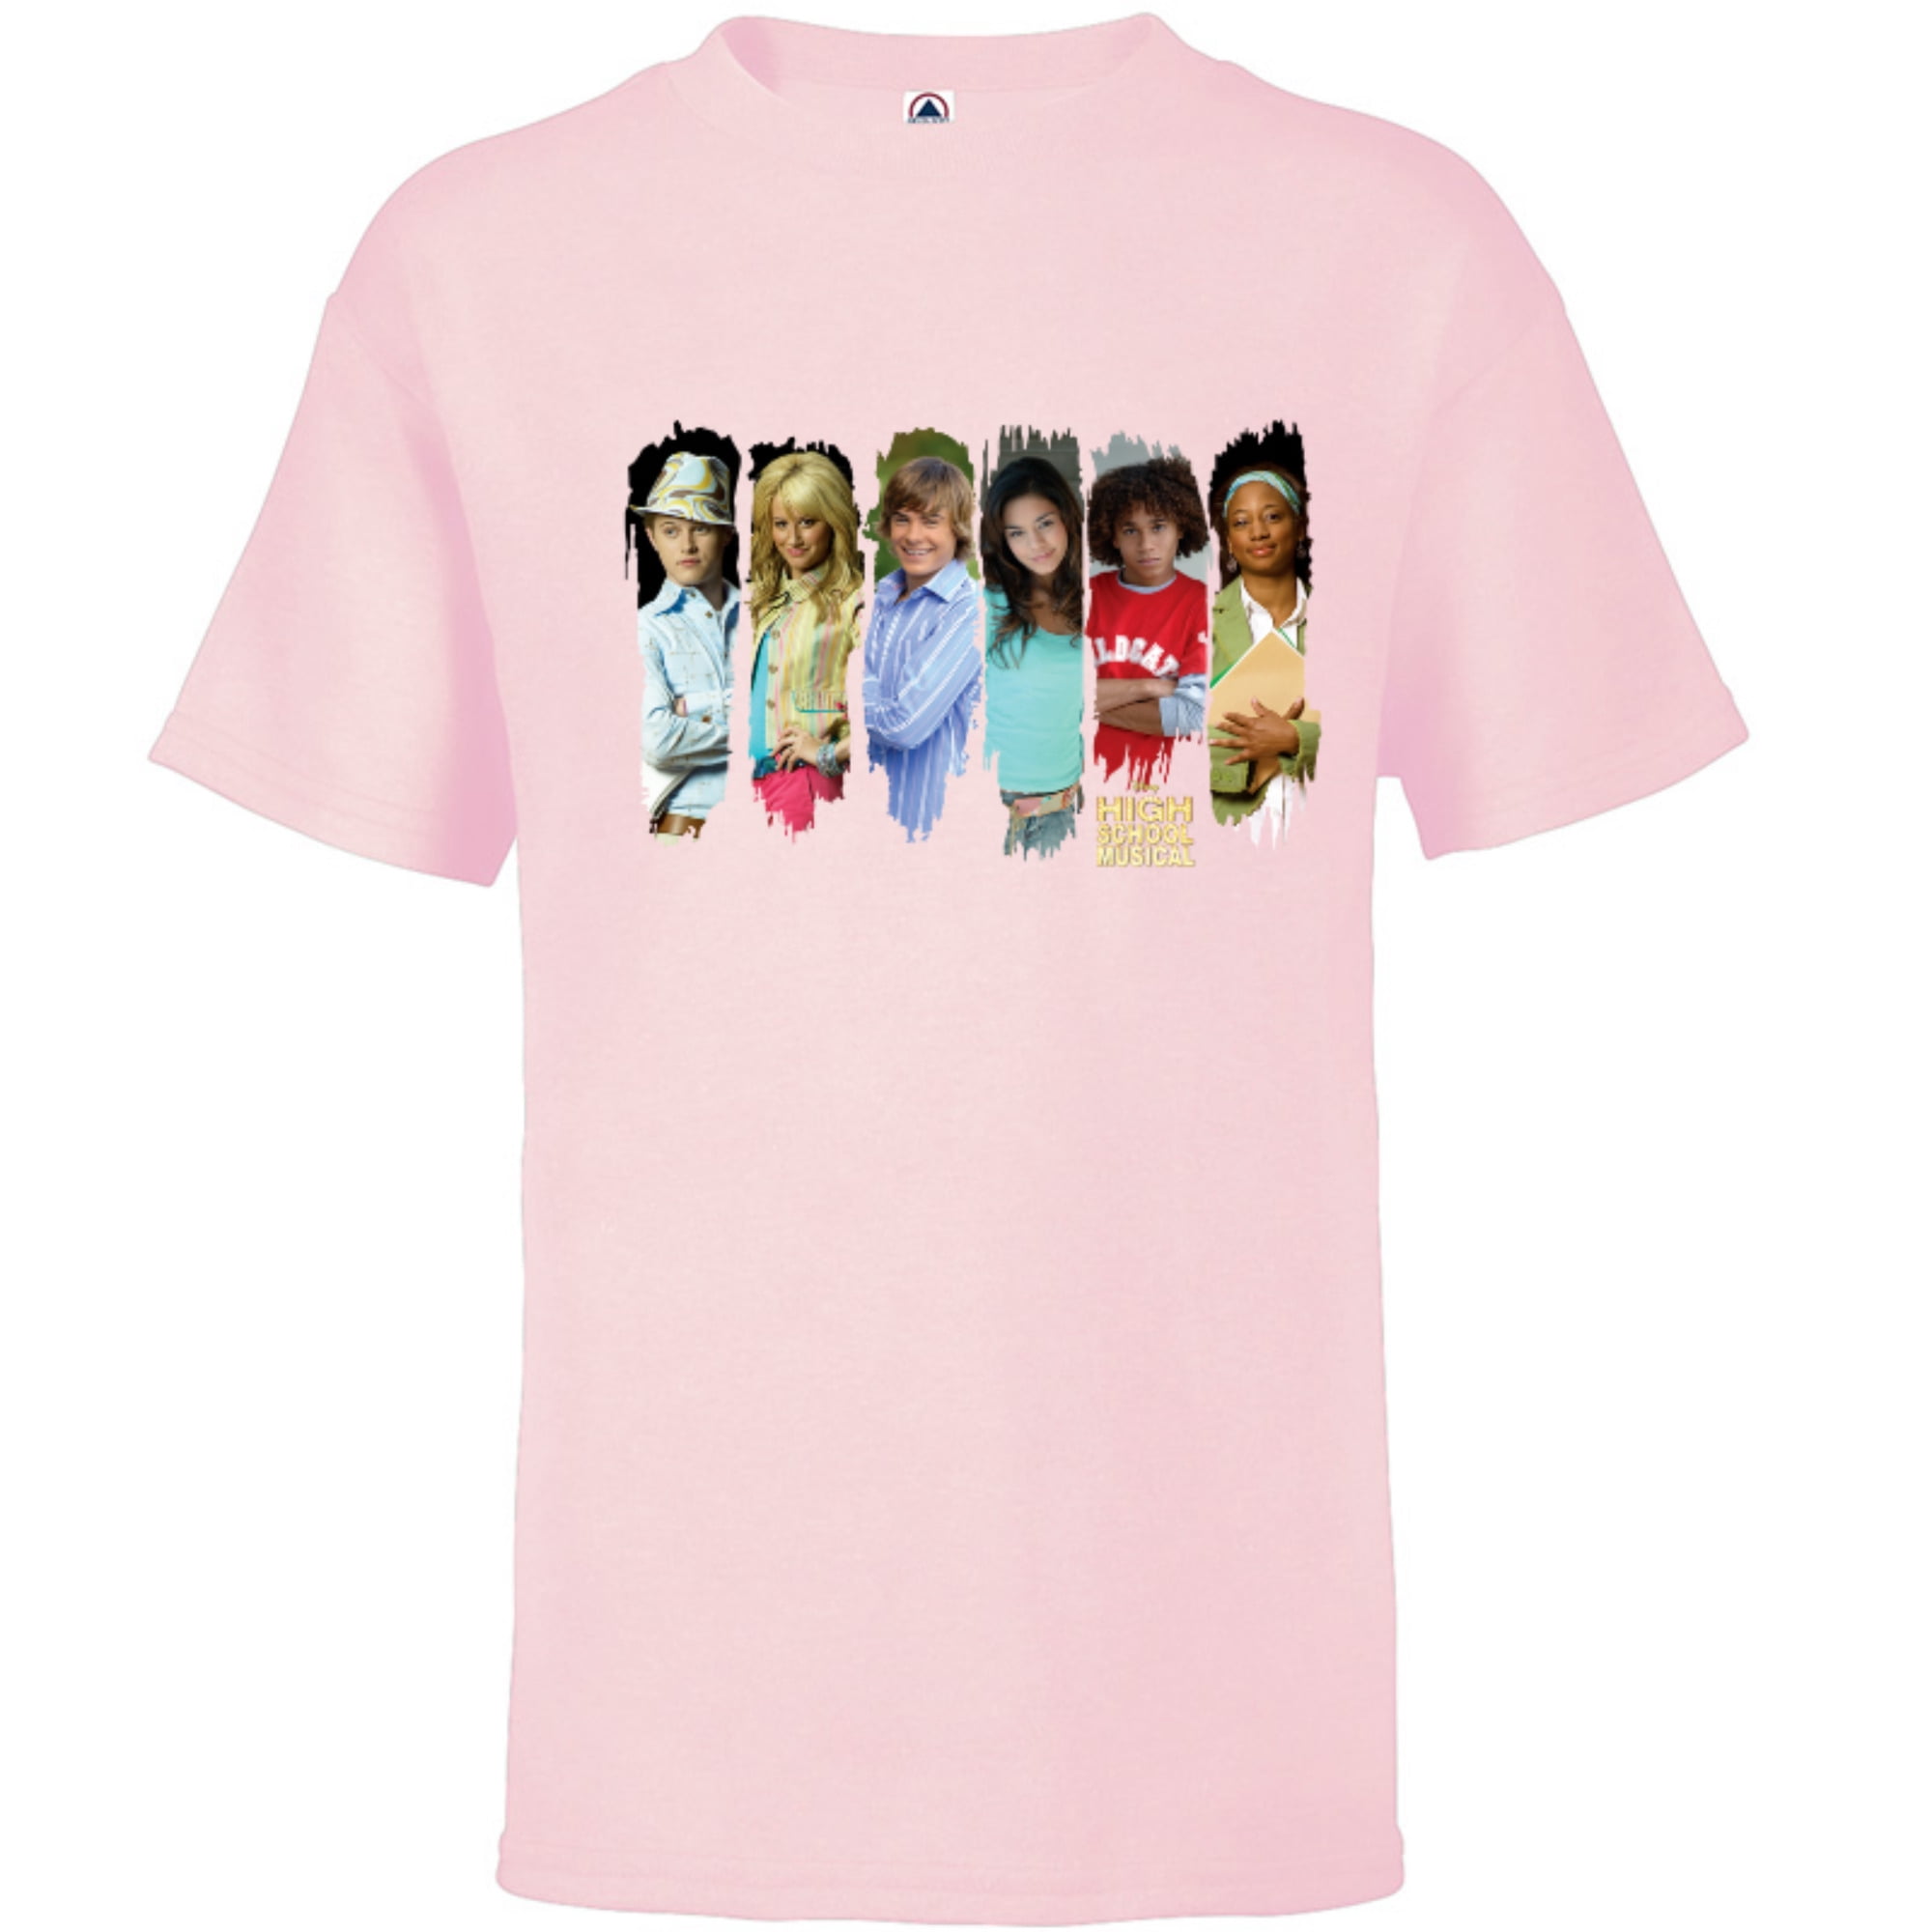 Disney Channel High School Musical Characters - Short Sleeve T-Shirt for  Kids - Customized-Soft Pink